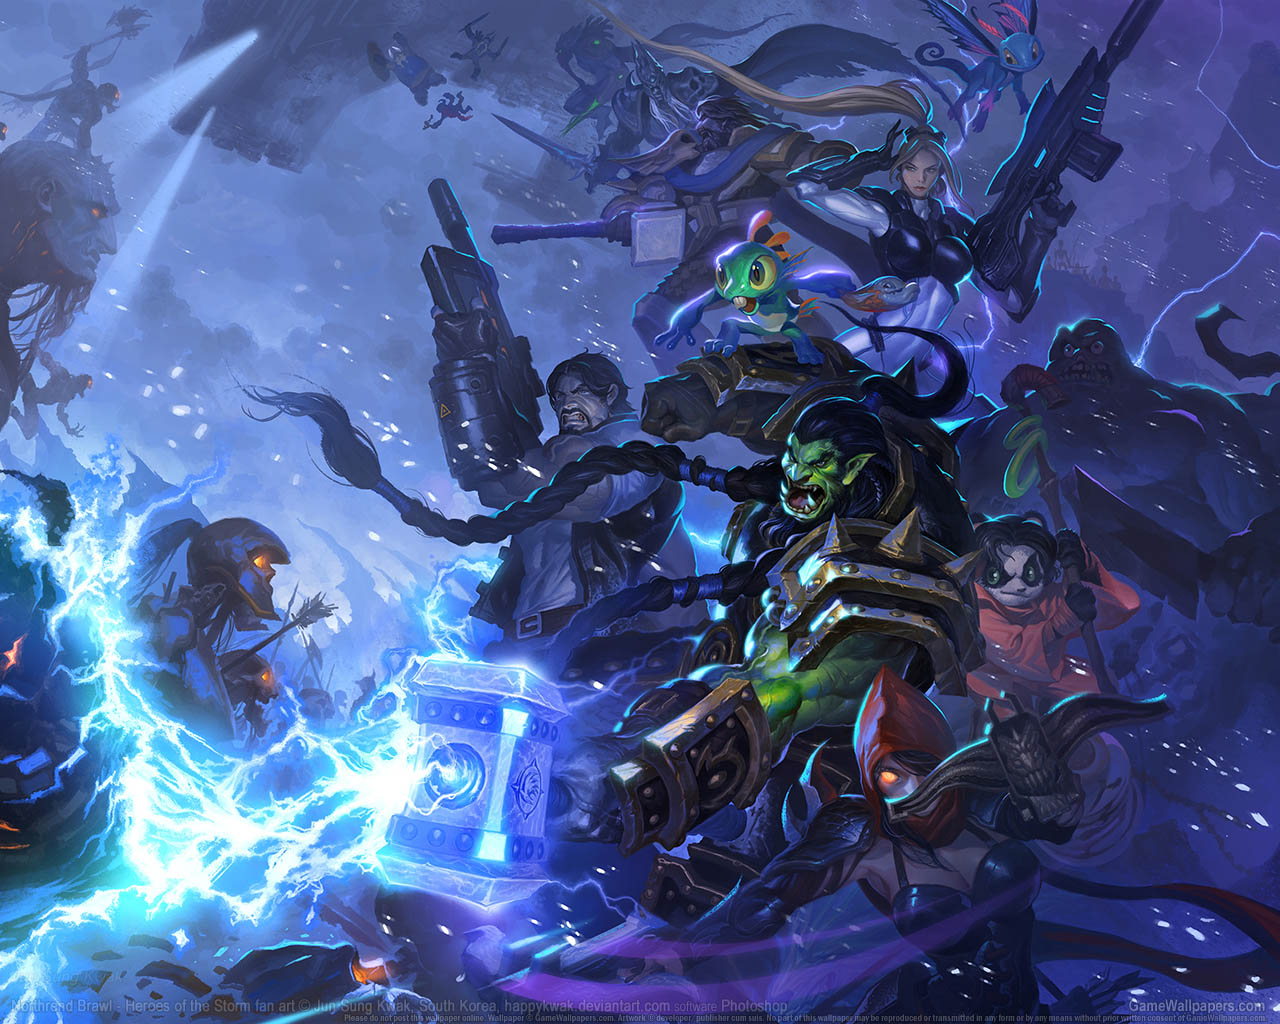 Heroes of the Storm fan art achtergrond 08 1280x1024